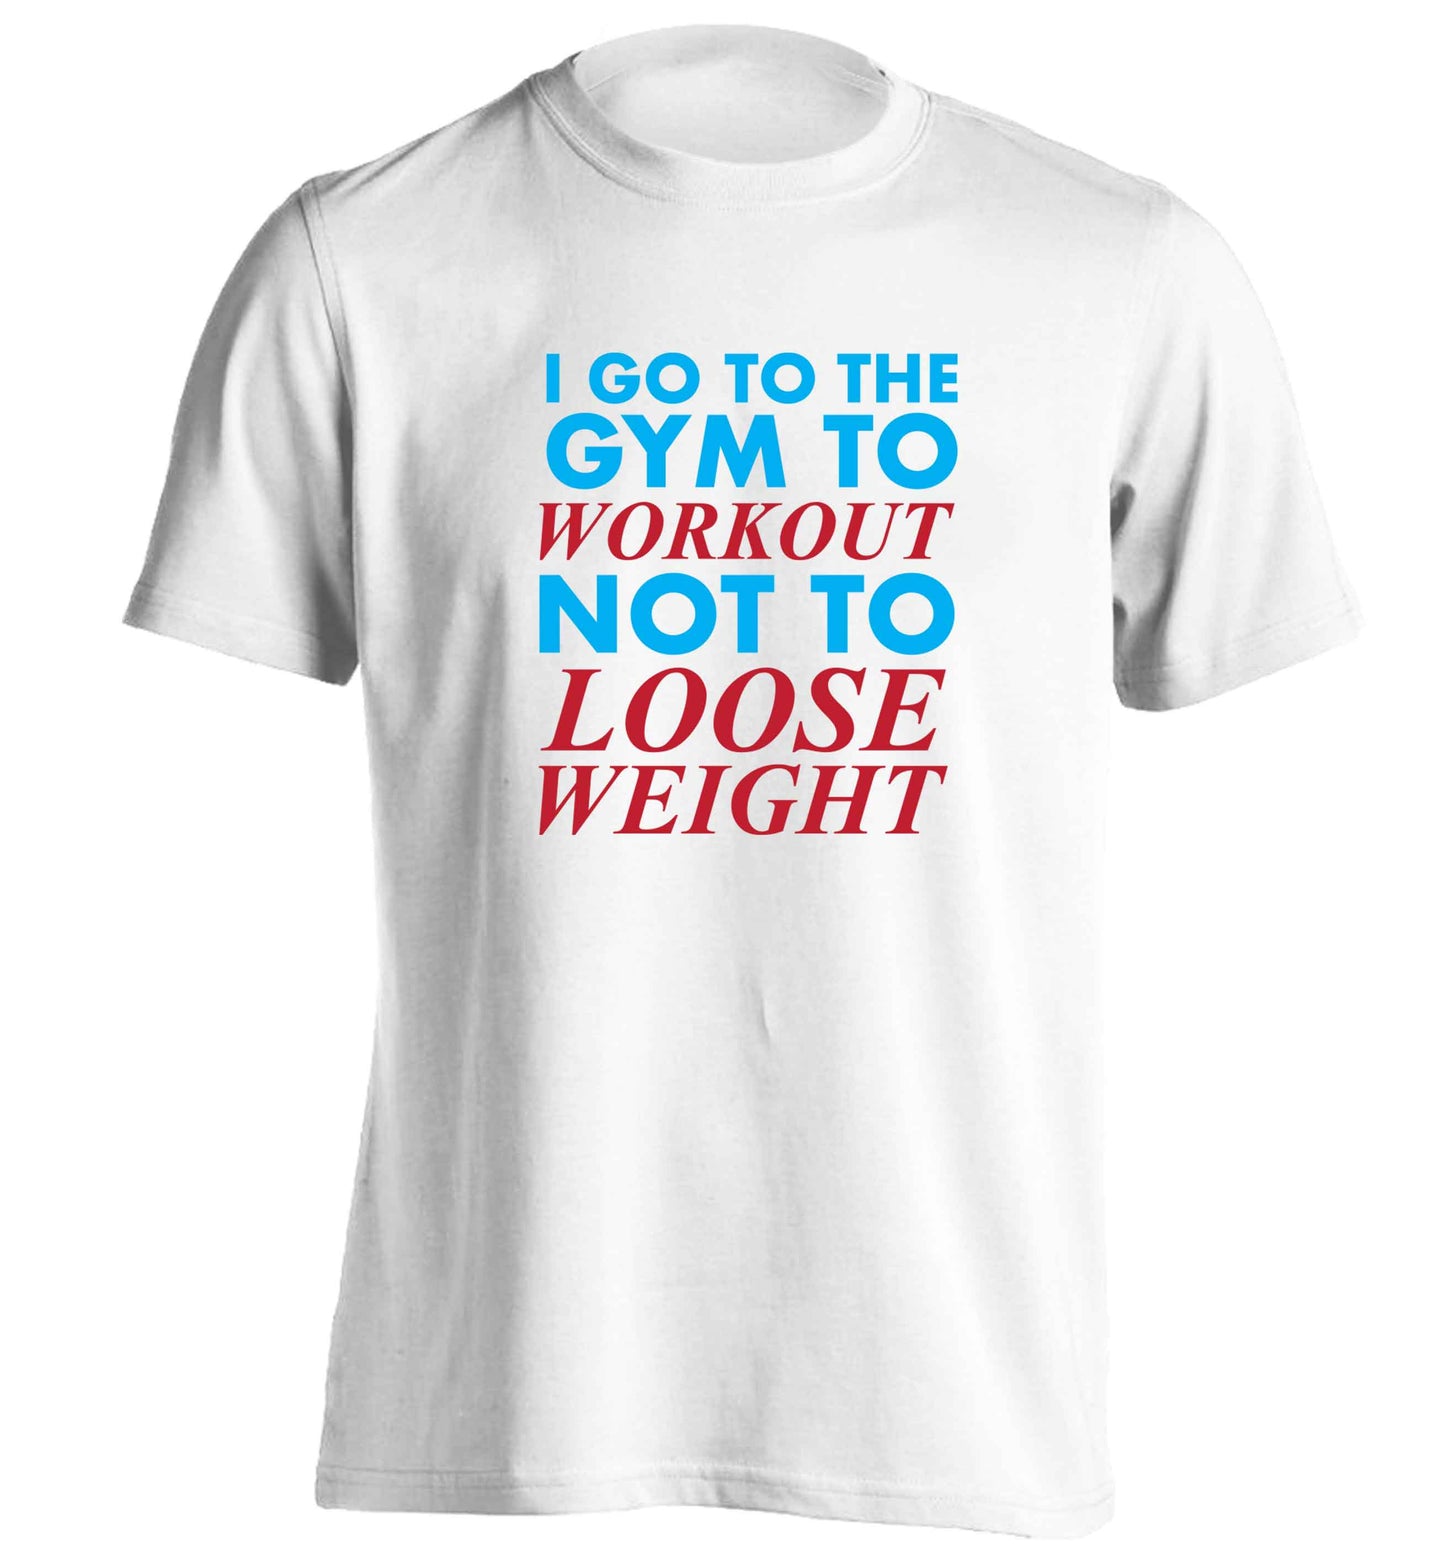 I go to the gym to workout not to loose weight adults unisex white Tshirt 2XL